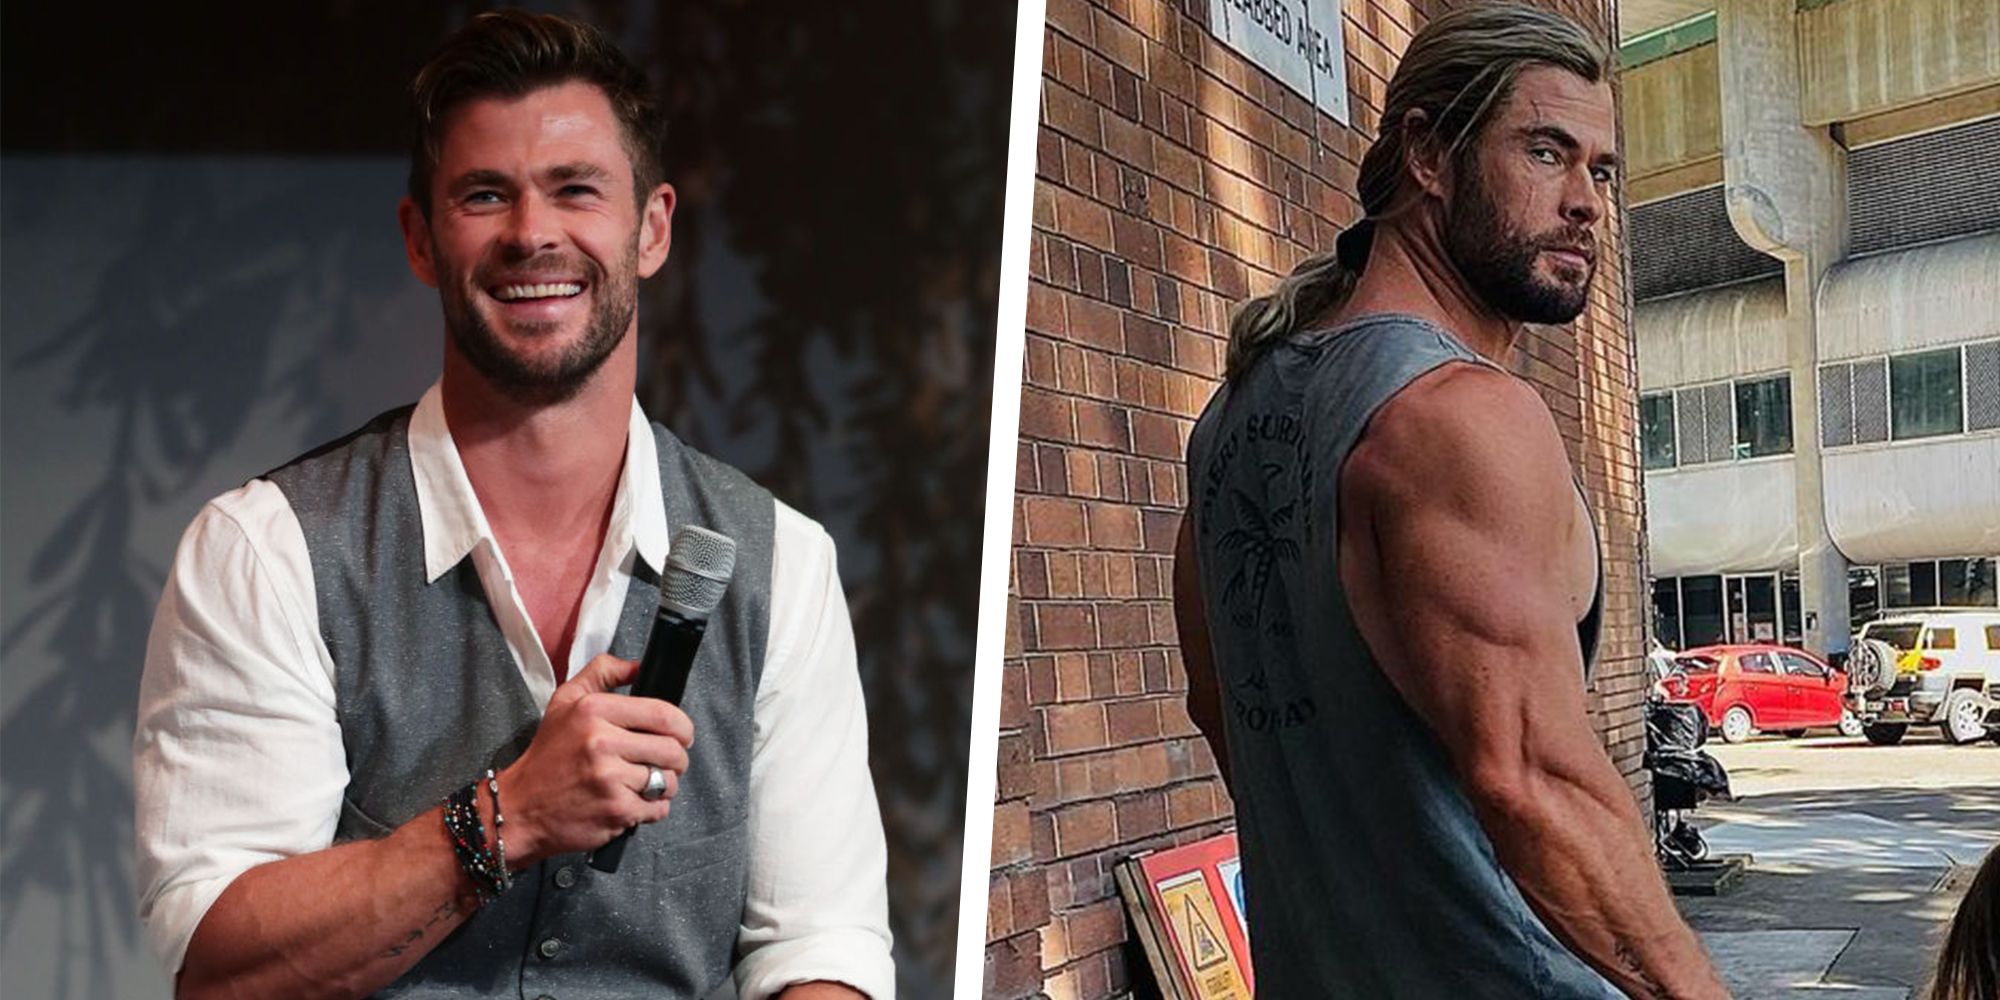 Chris Hemsworth and Elsa Pataky have matching tattoos | Daily Mail Online